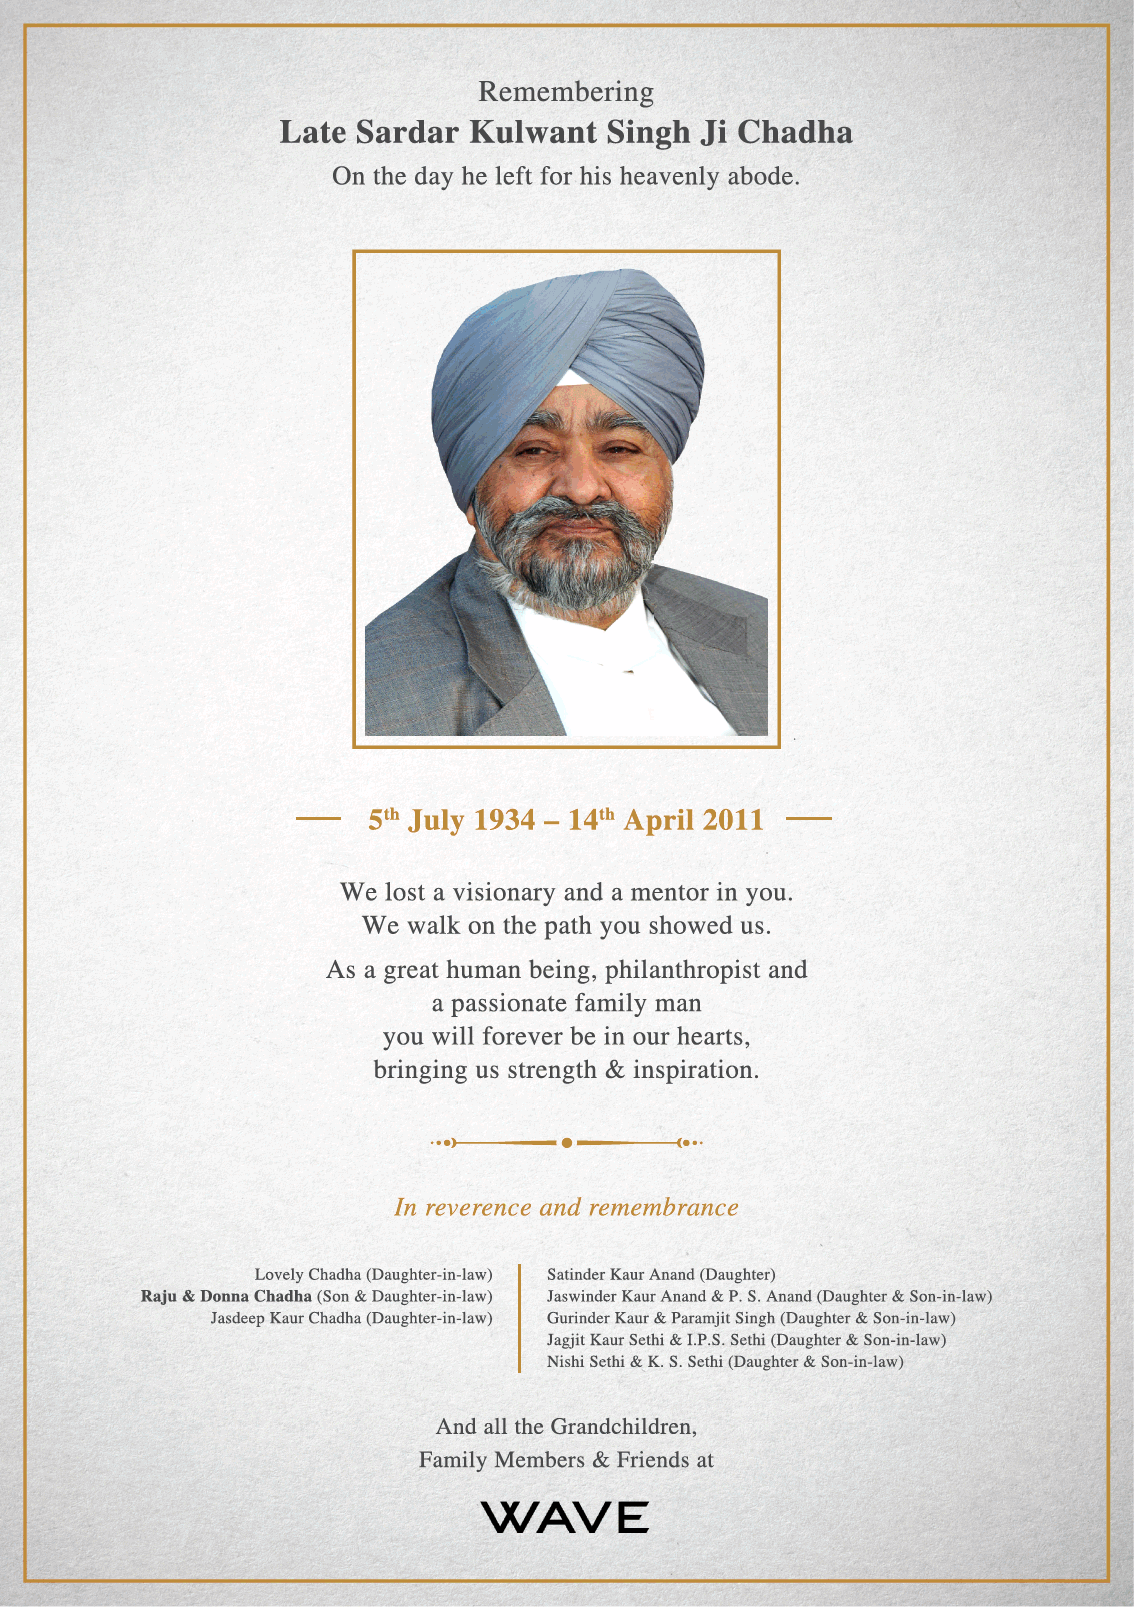 late-sardar-kulwant-singh-ji-chadha-in-reverence-and-remembrance-ad-times-of-india-delhi-14-04-2019.png